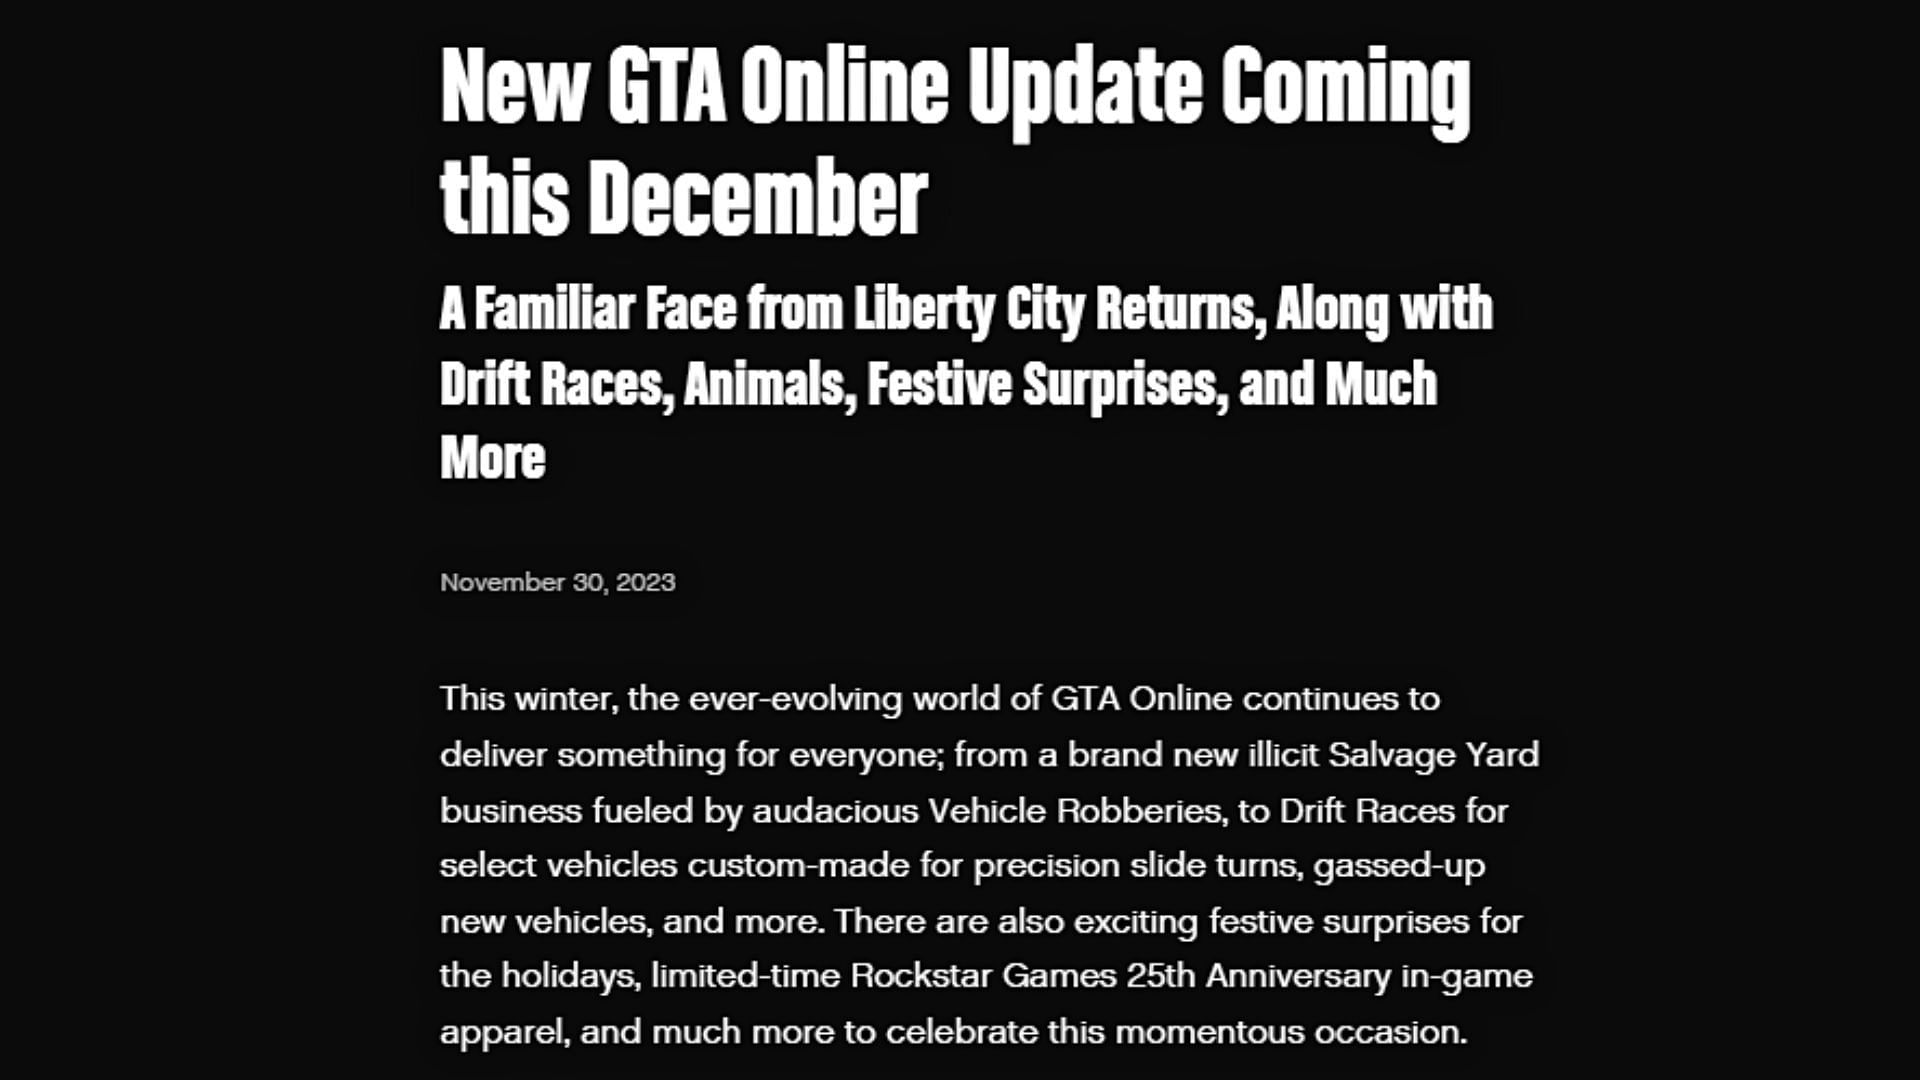 Rockstar mentions upcoming festive surprises for the holidays (Image via Rockstar Games Newswire)